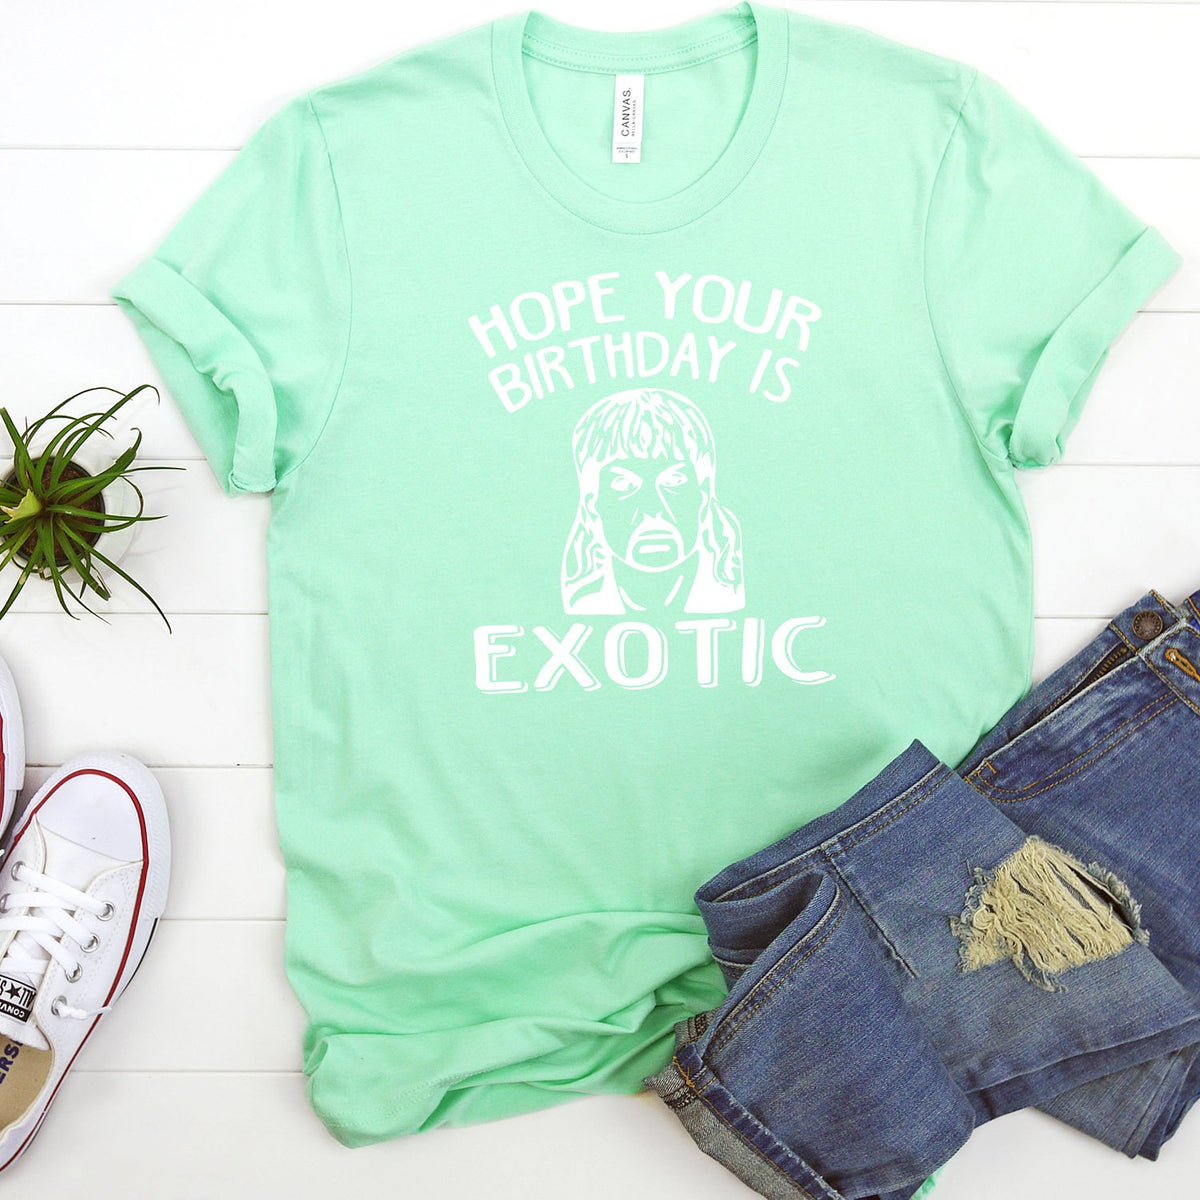 Hope Your Birthday is Exotic - Short Sleeve Tee Shirt